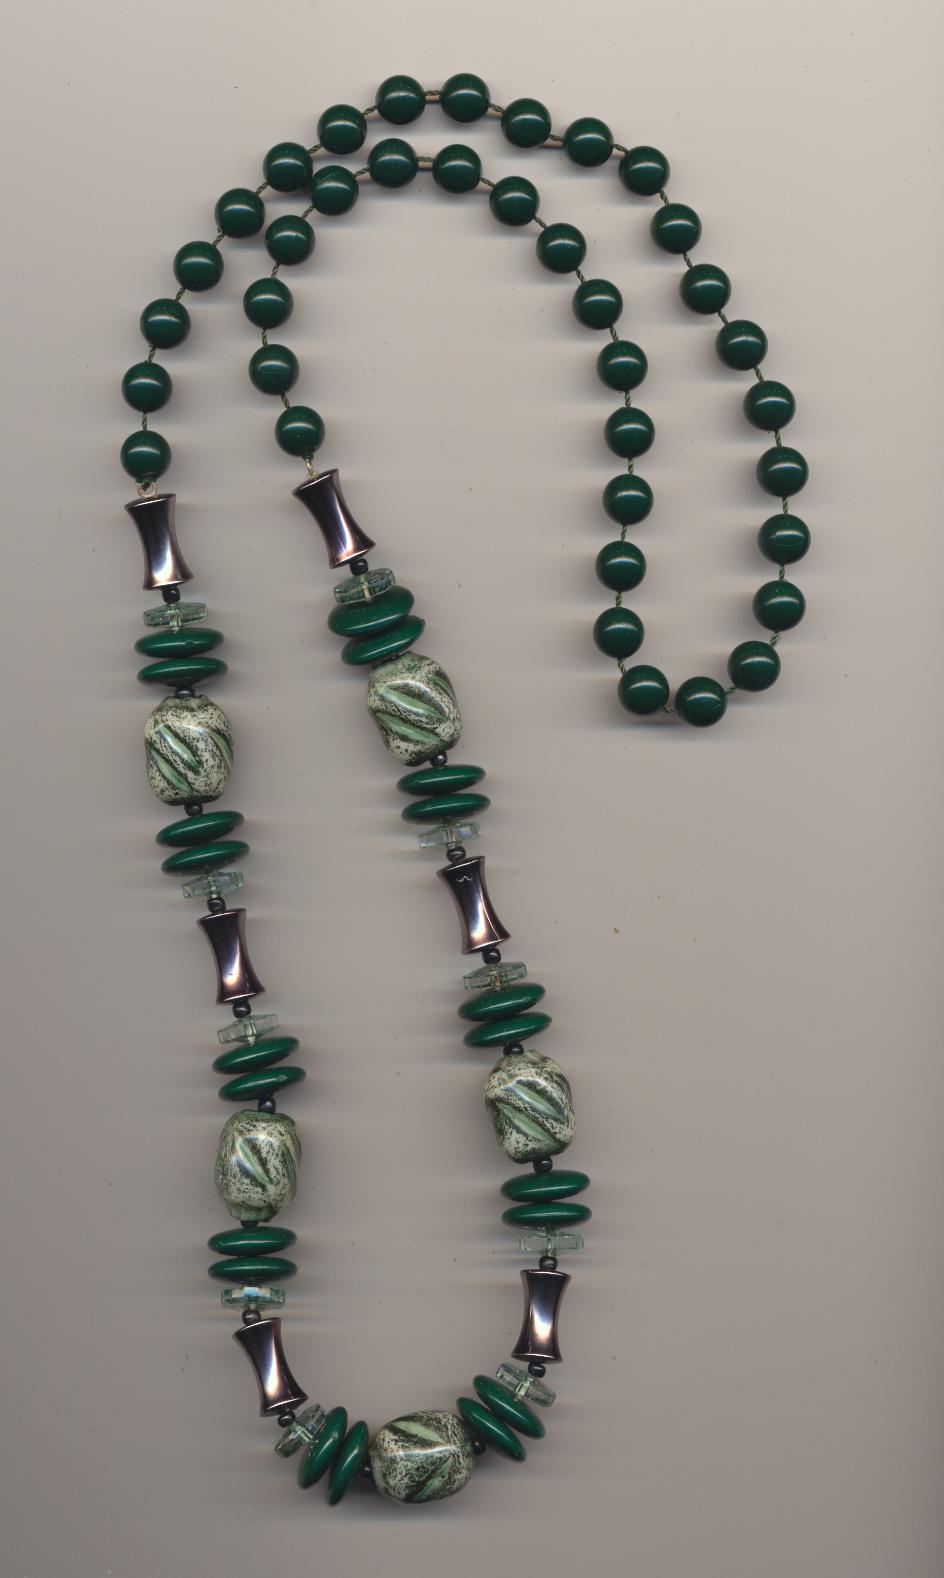 Necklace made of imitation and real green plastic beads, 1970's, length 32'' 82cm.